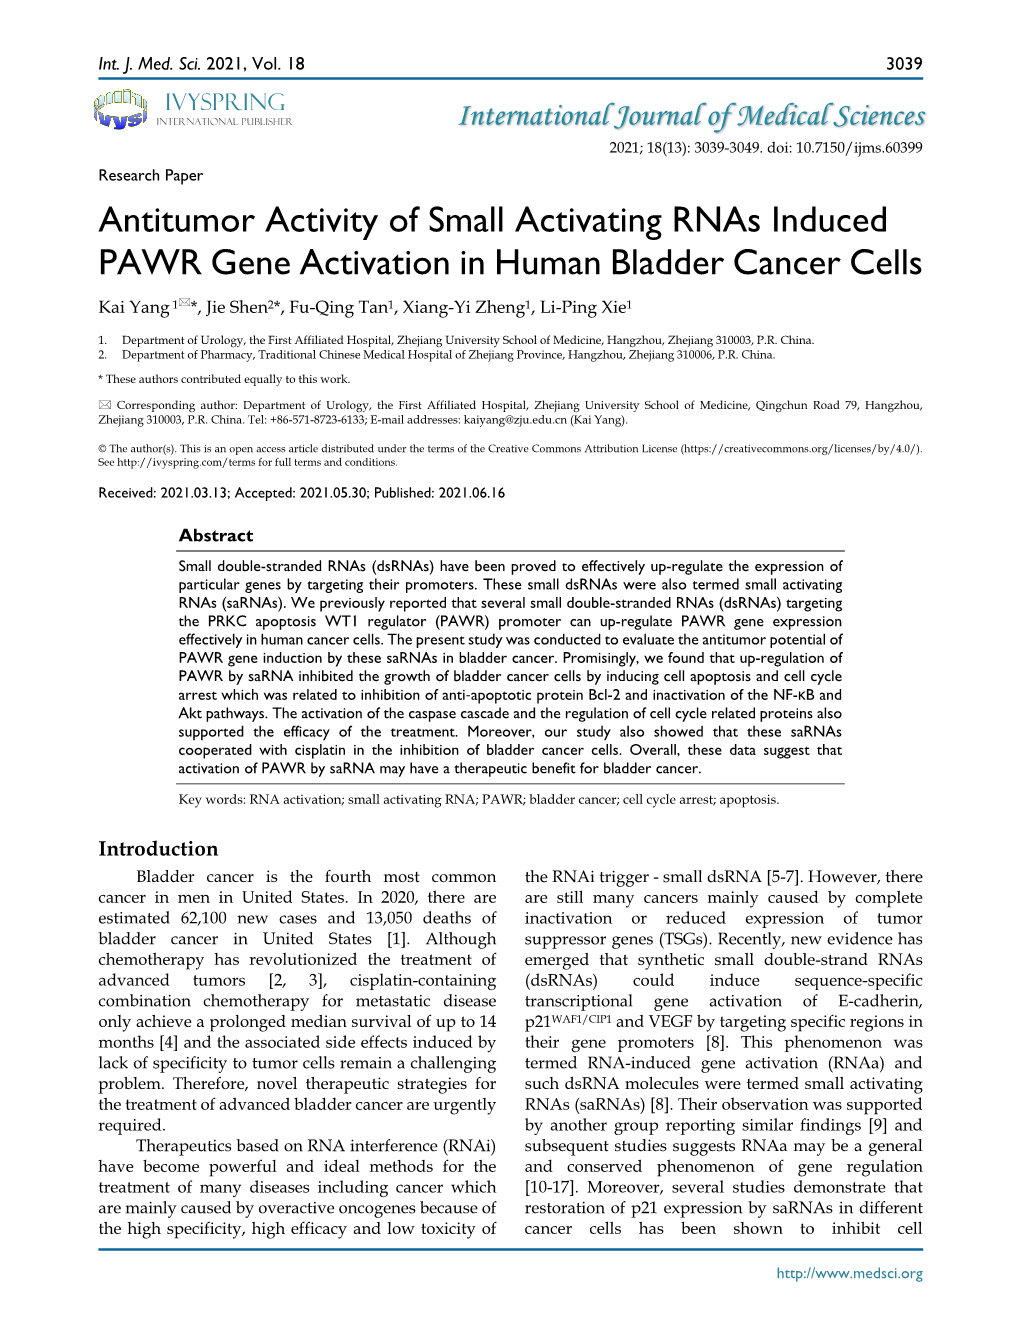 Antitumor Activity of Small Activating Rnas Induced PAWR Gene Activation in Human Bladder Cancer Cells